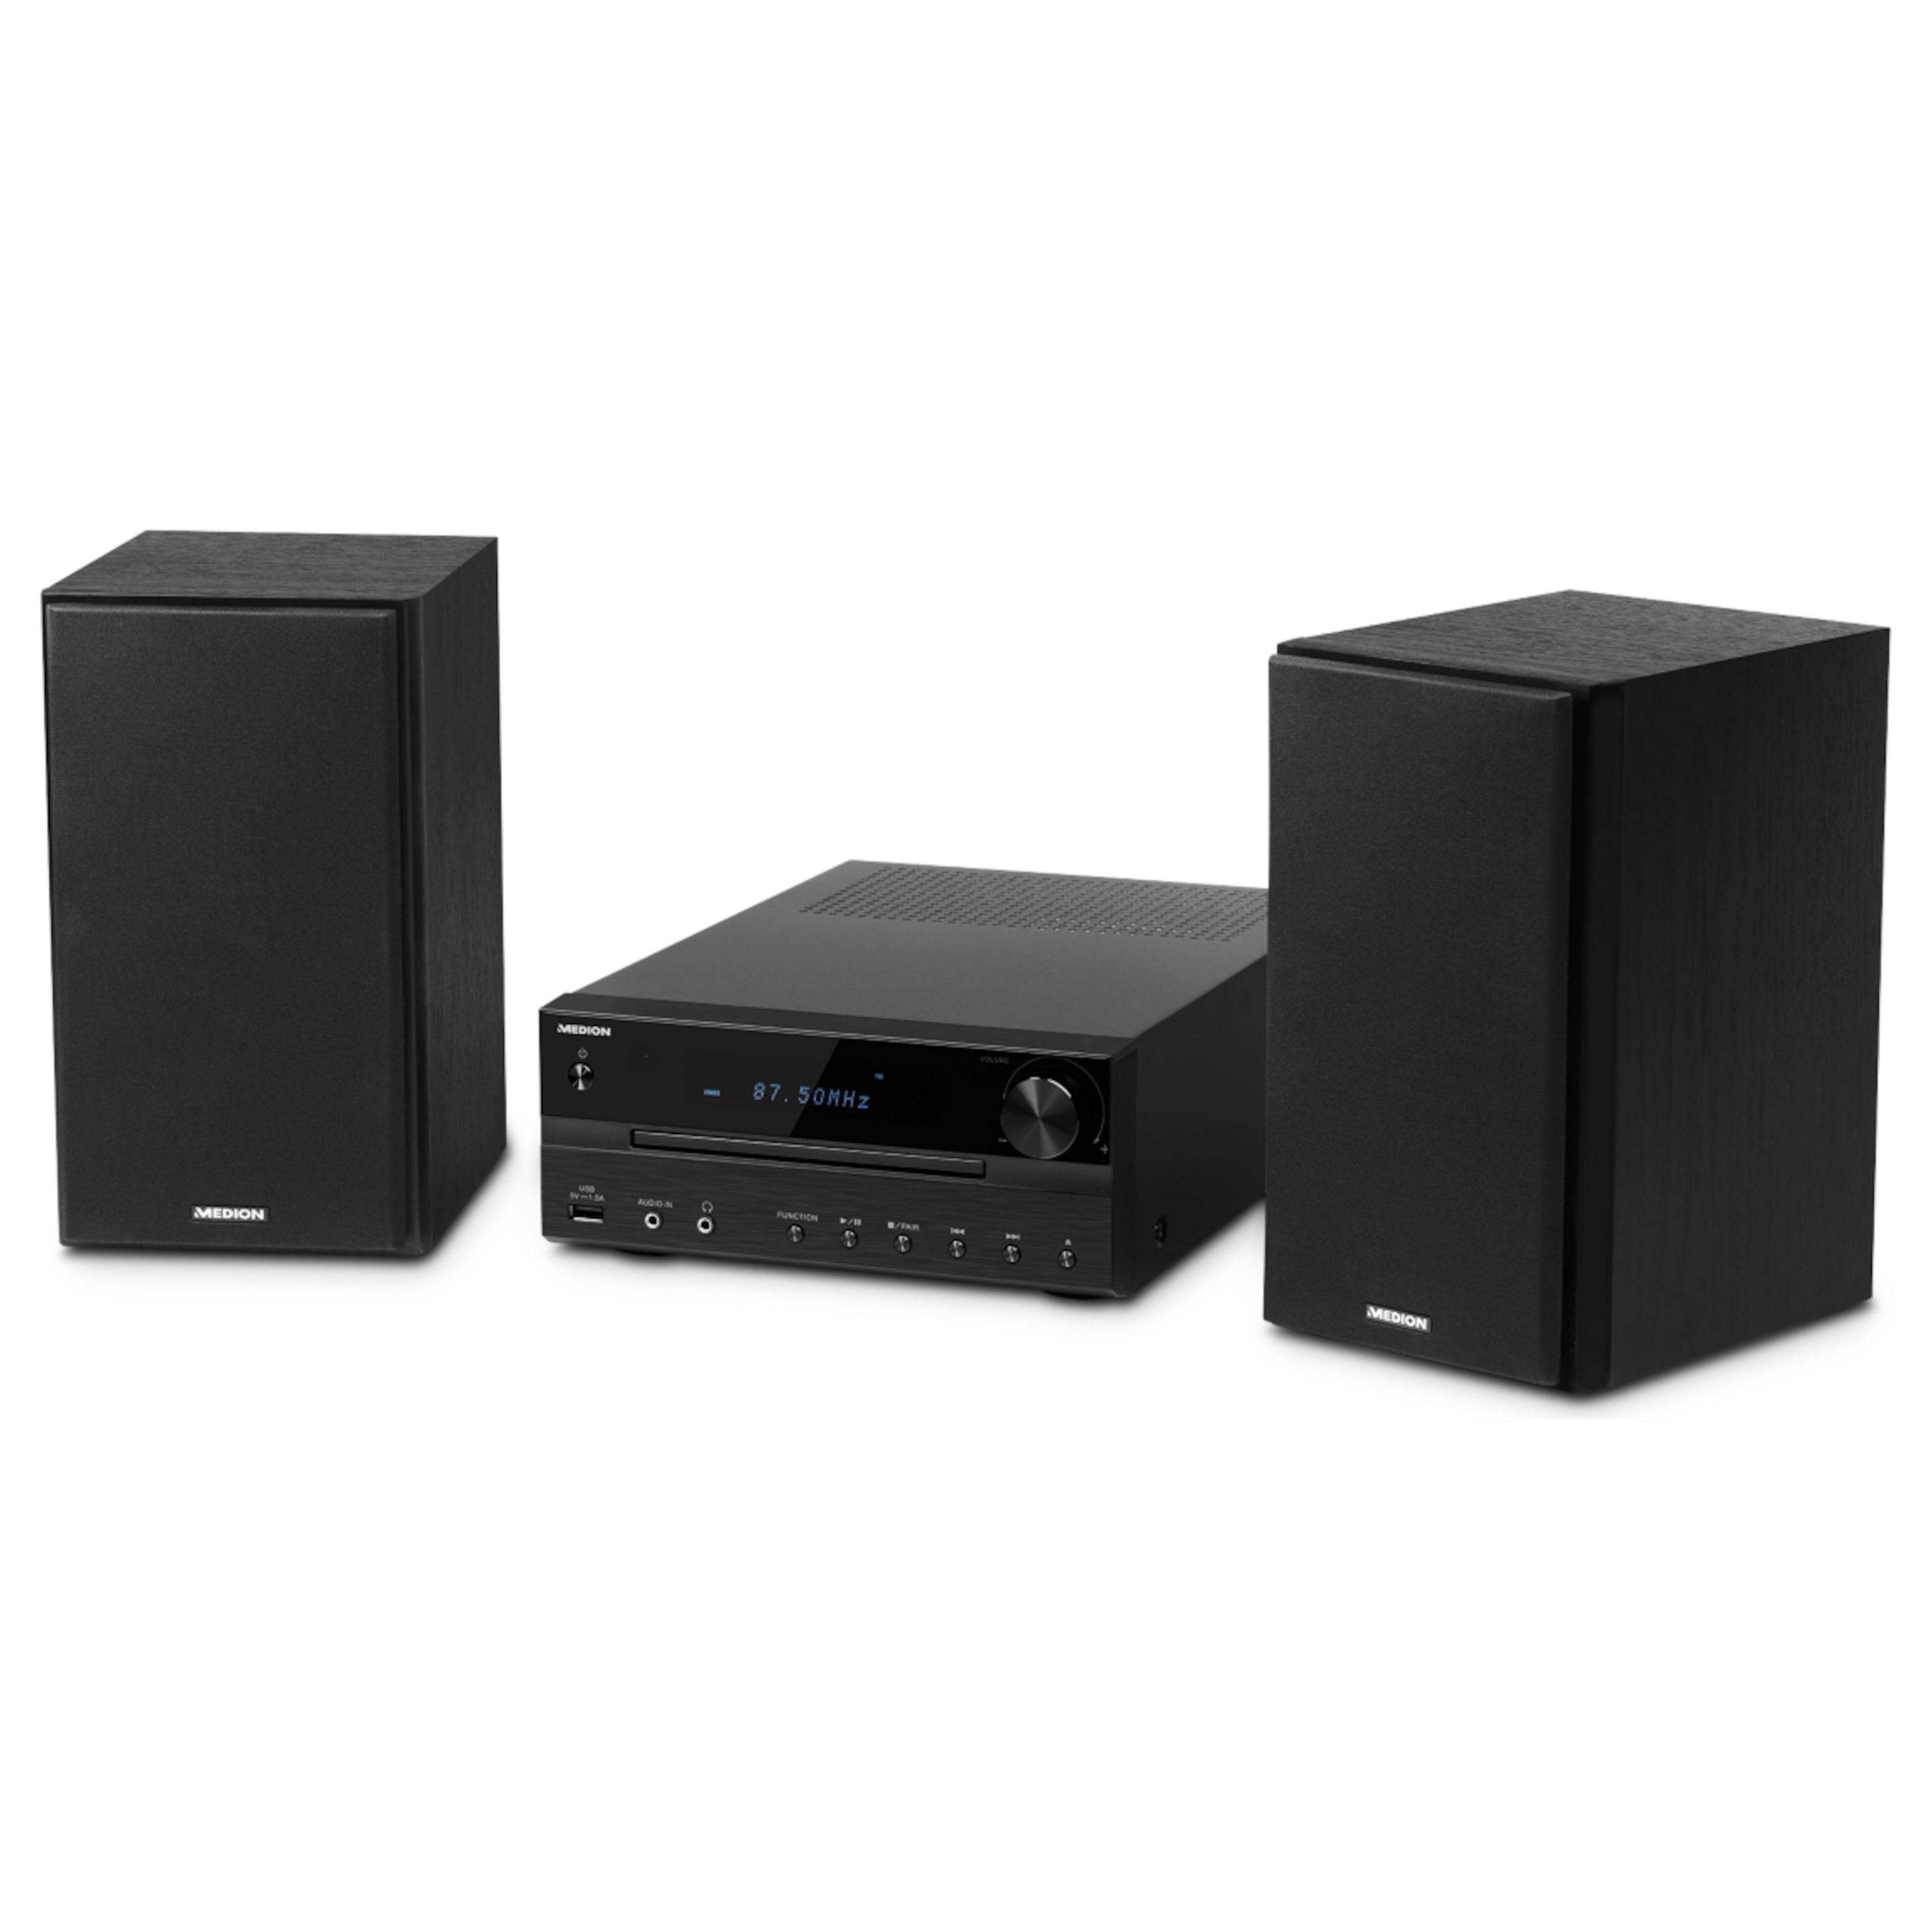 MEDION® LIFE® P64262 Micro-Audio-System mit CD-Player, DAB+, Bluetooth® 4.1, USB-Anschluss & -Ladefunktion, AUX, PLL-UKW Stereo-Radio, 2 x 15 W RMS (B-Ware)